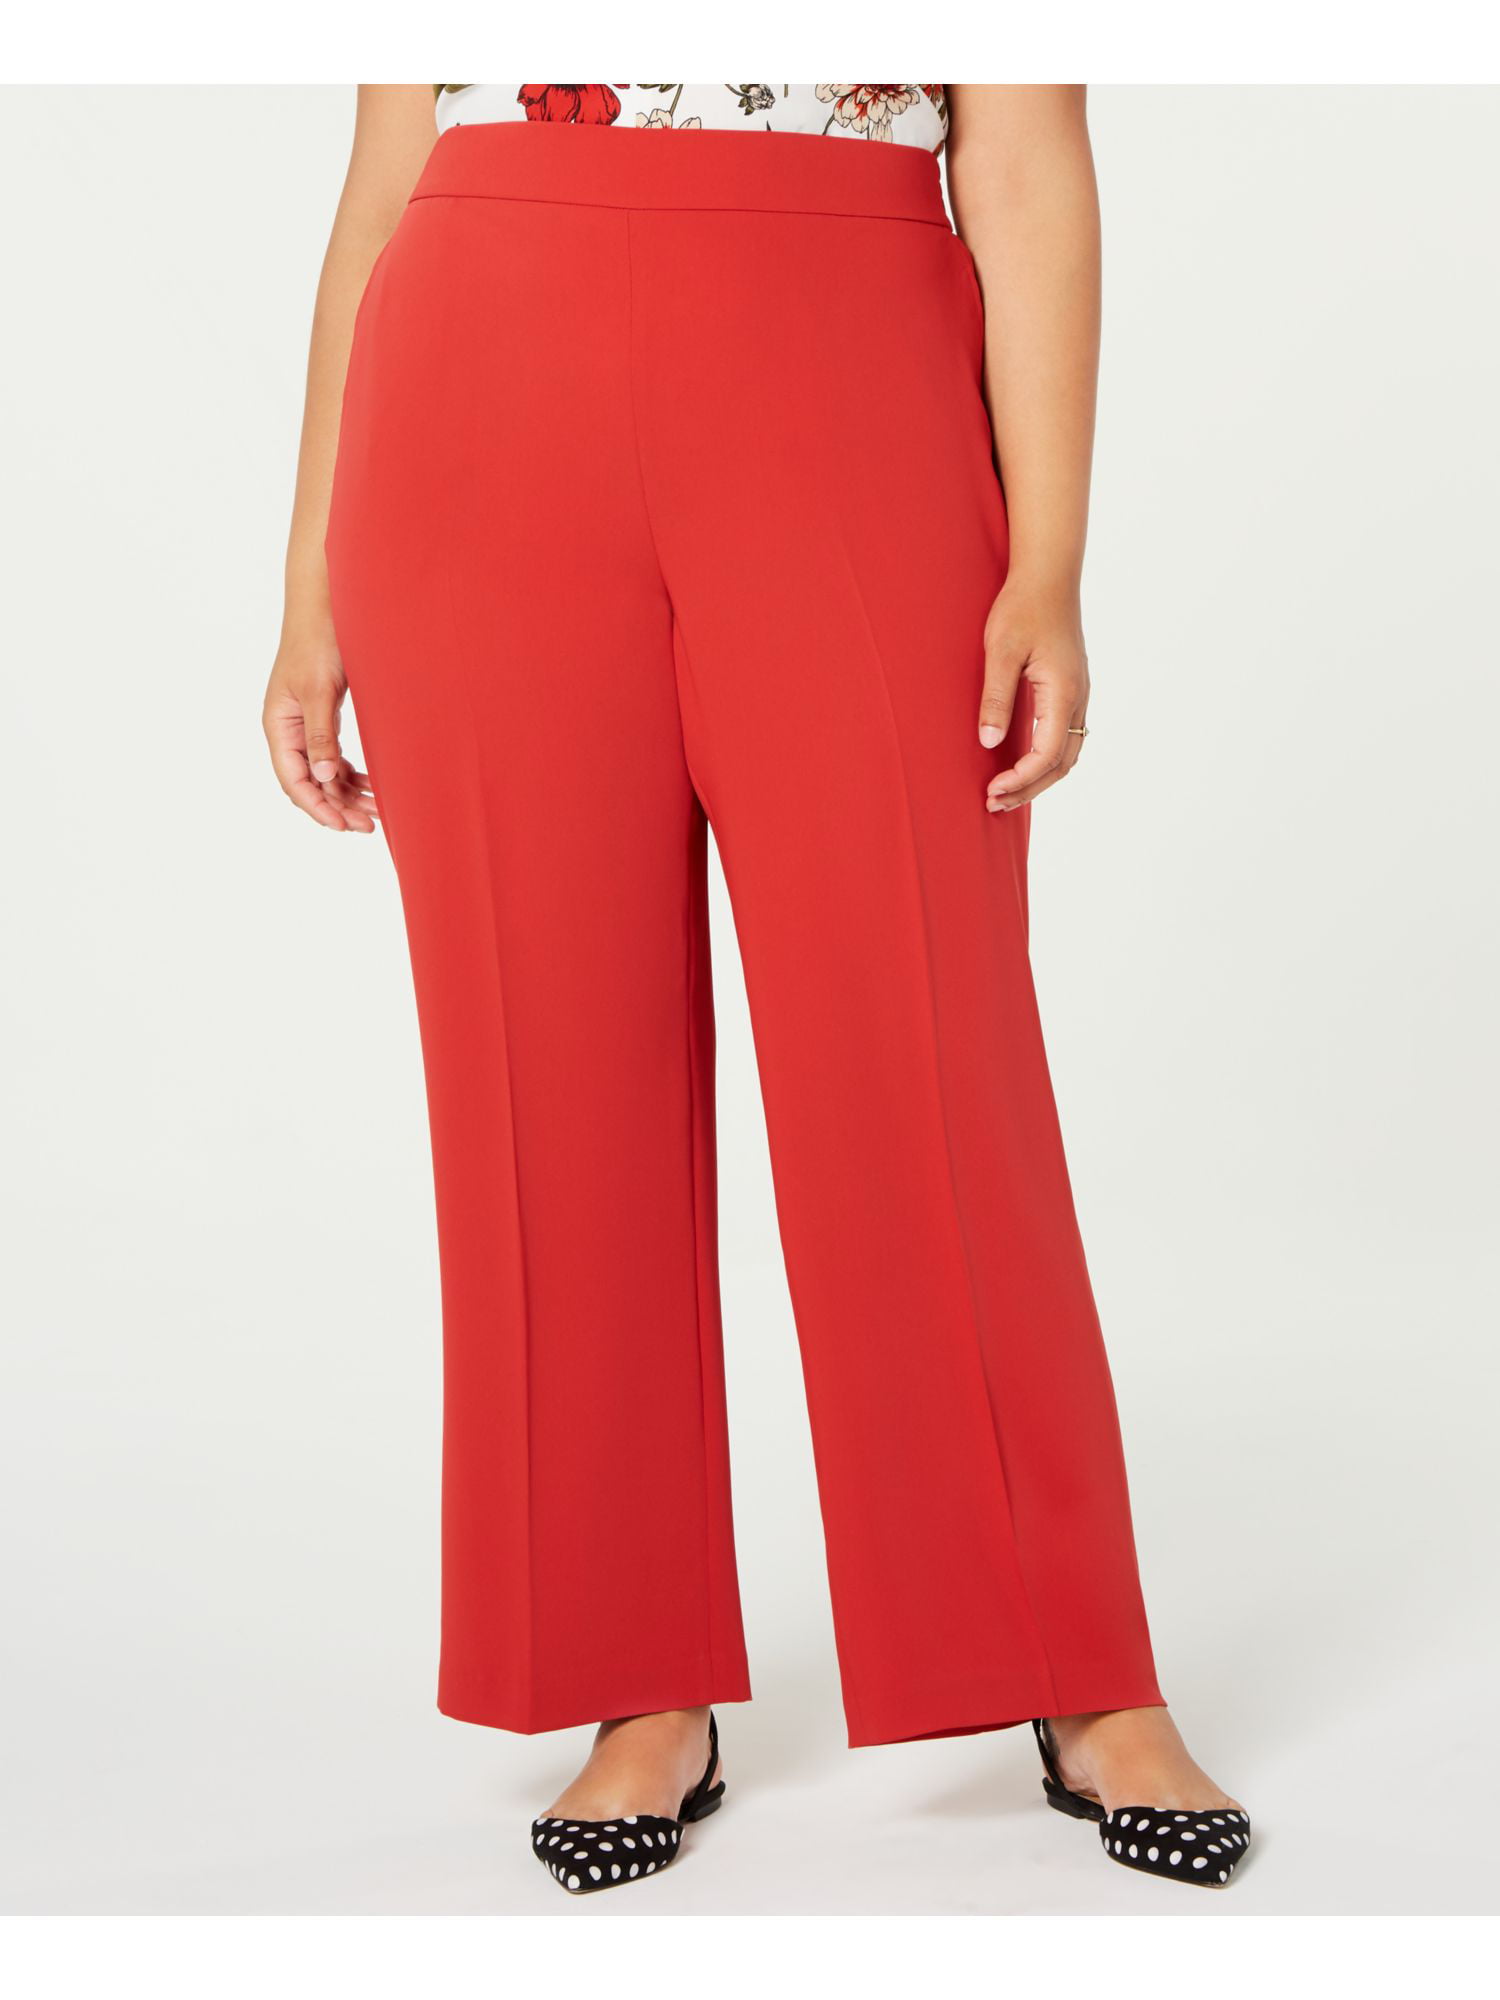 Women's Red Suits & Separates